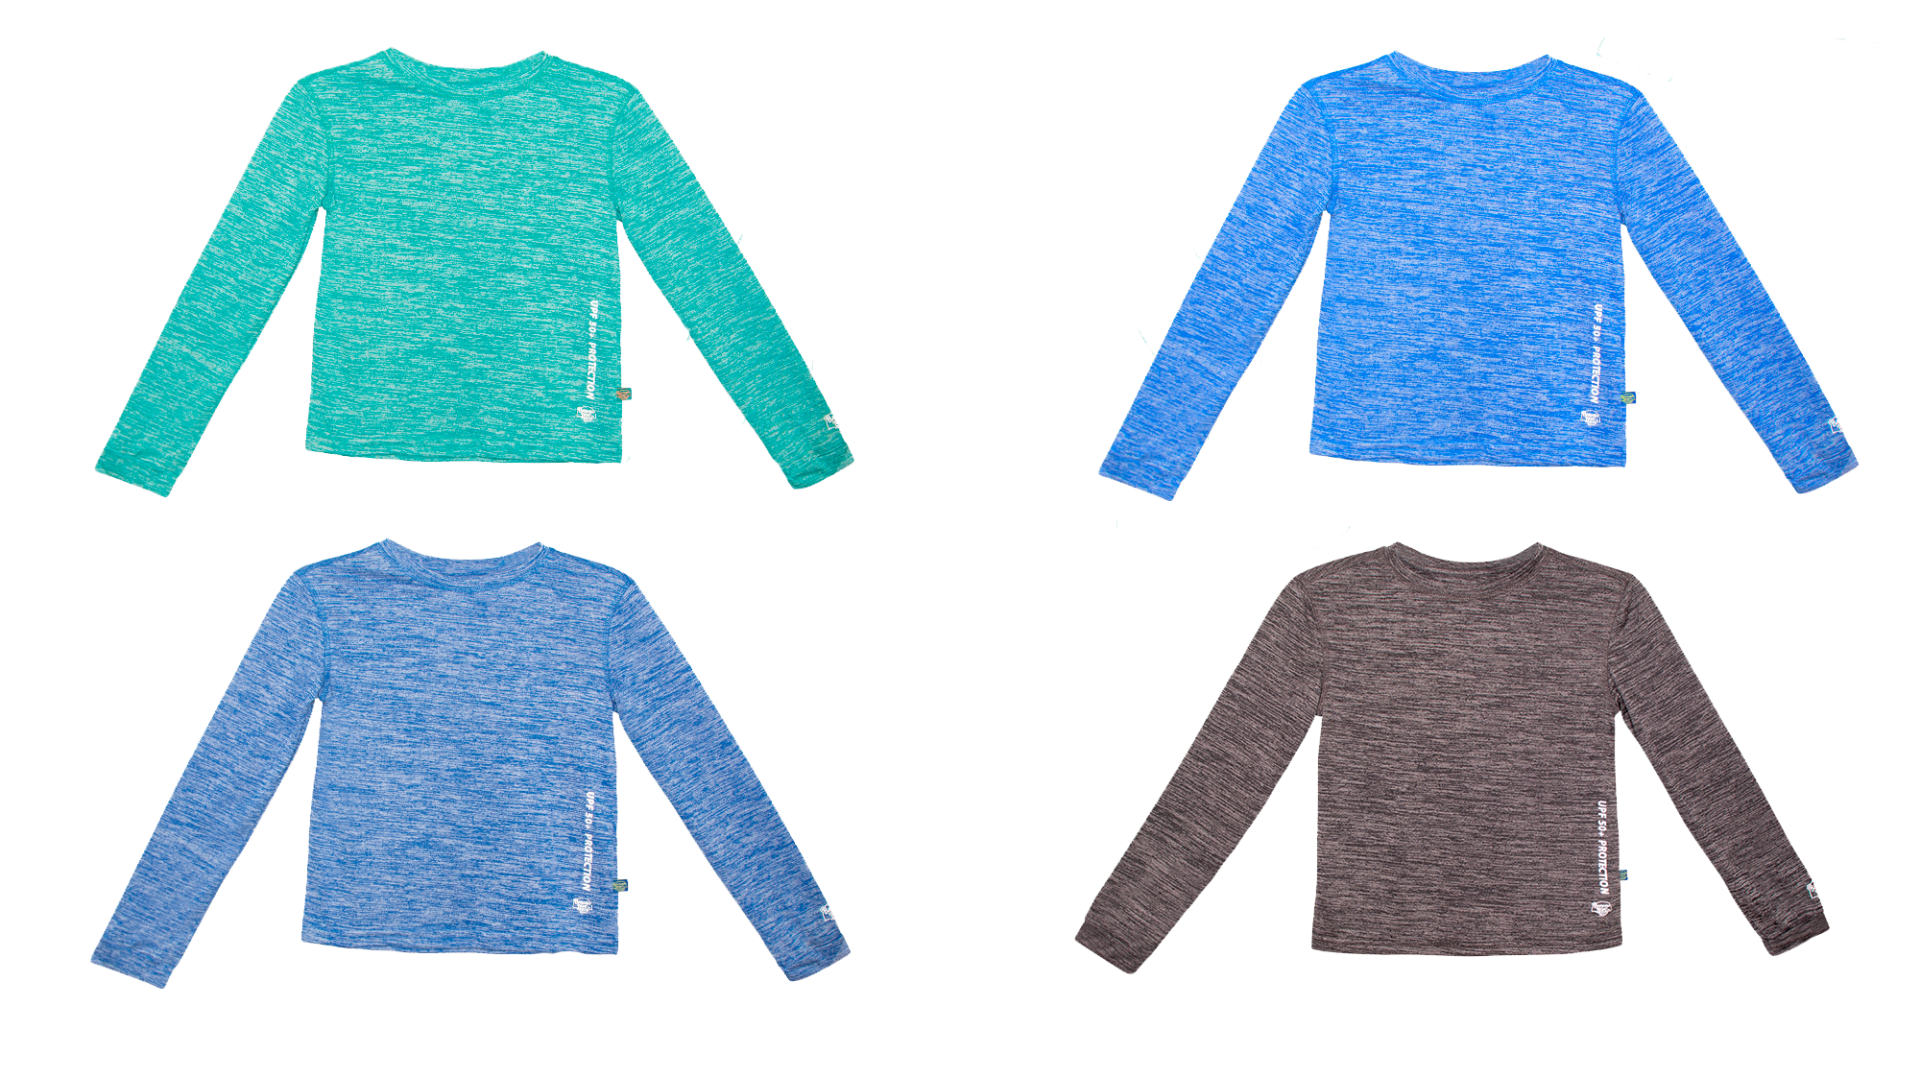 Toddler Boy's Long Sleeved Heathered Rash Guards - ASSORTED Colors - Sizes 2T-4T